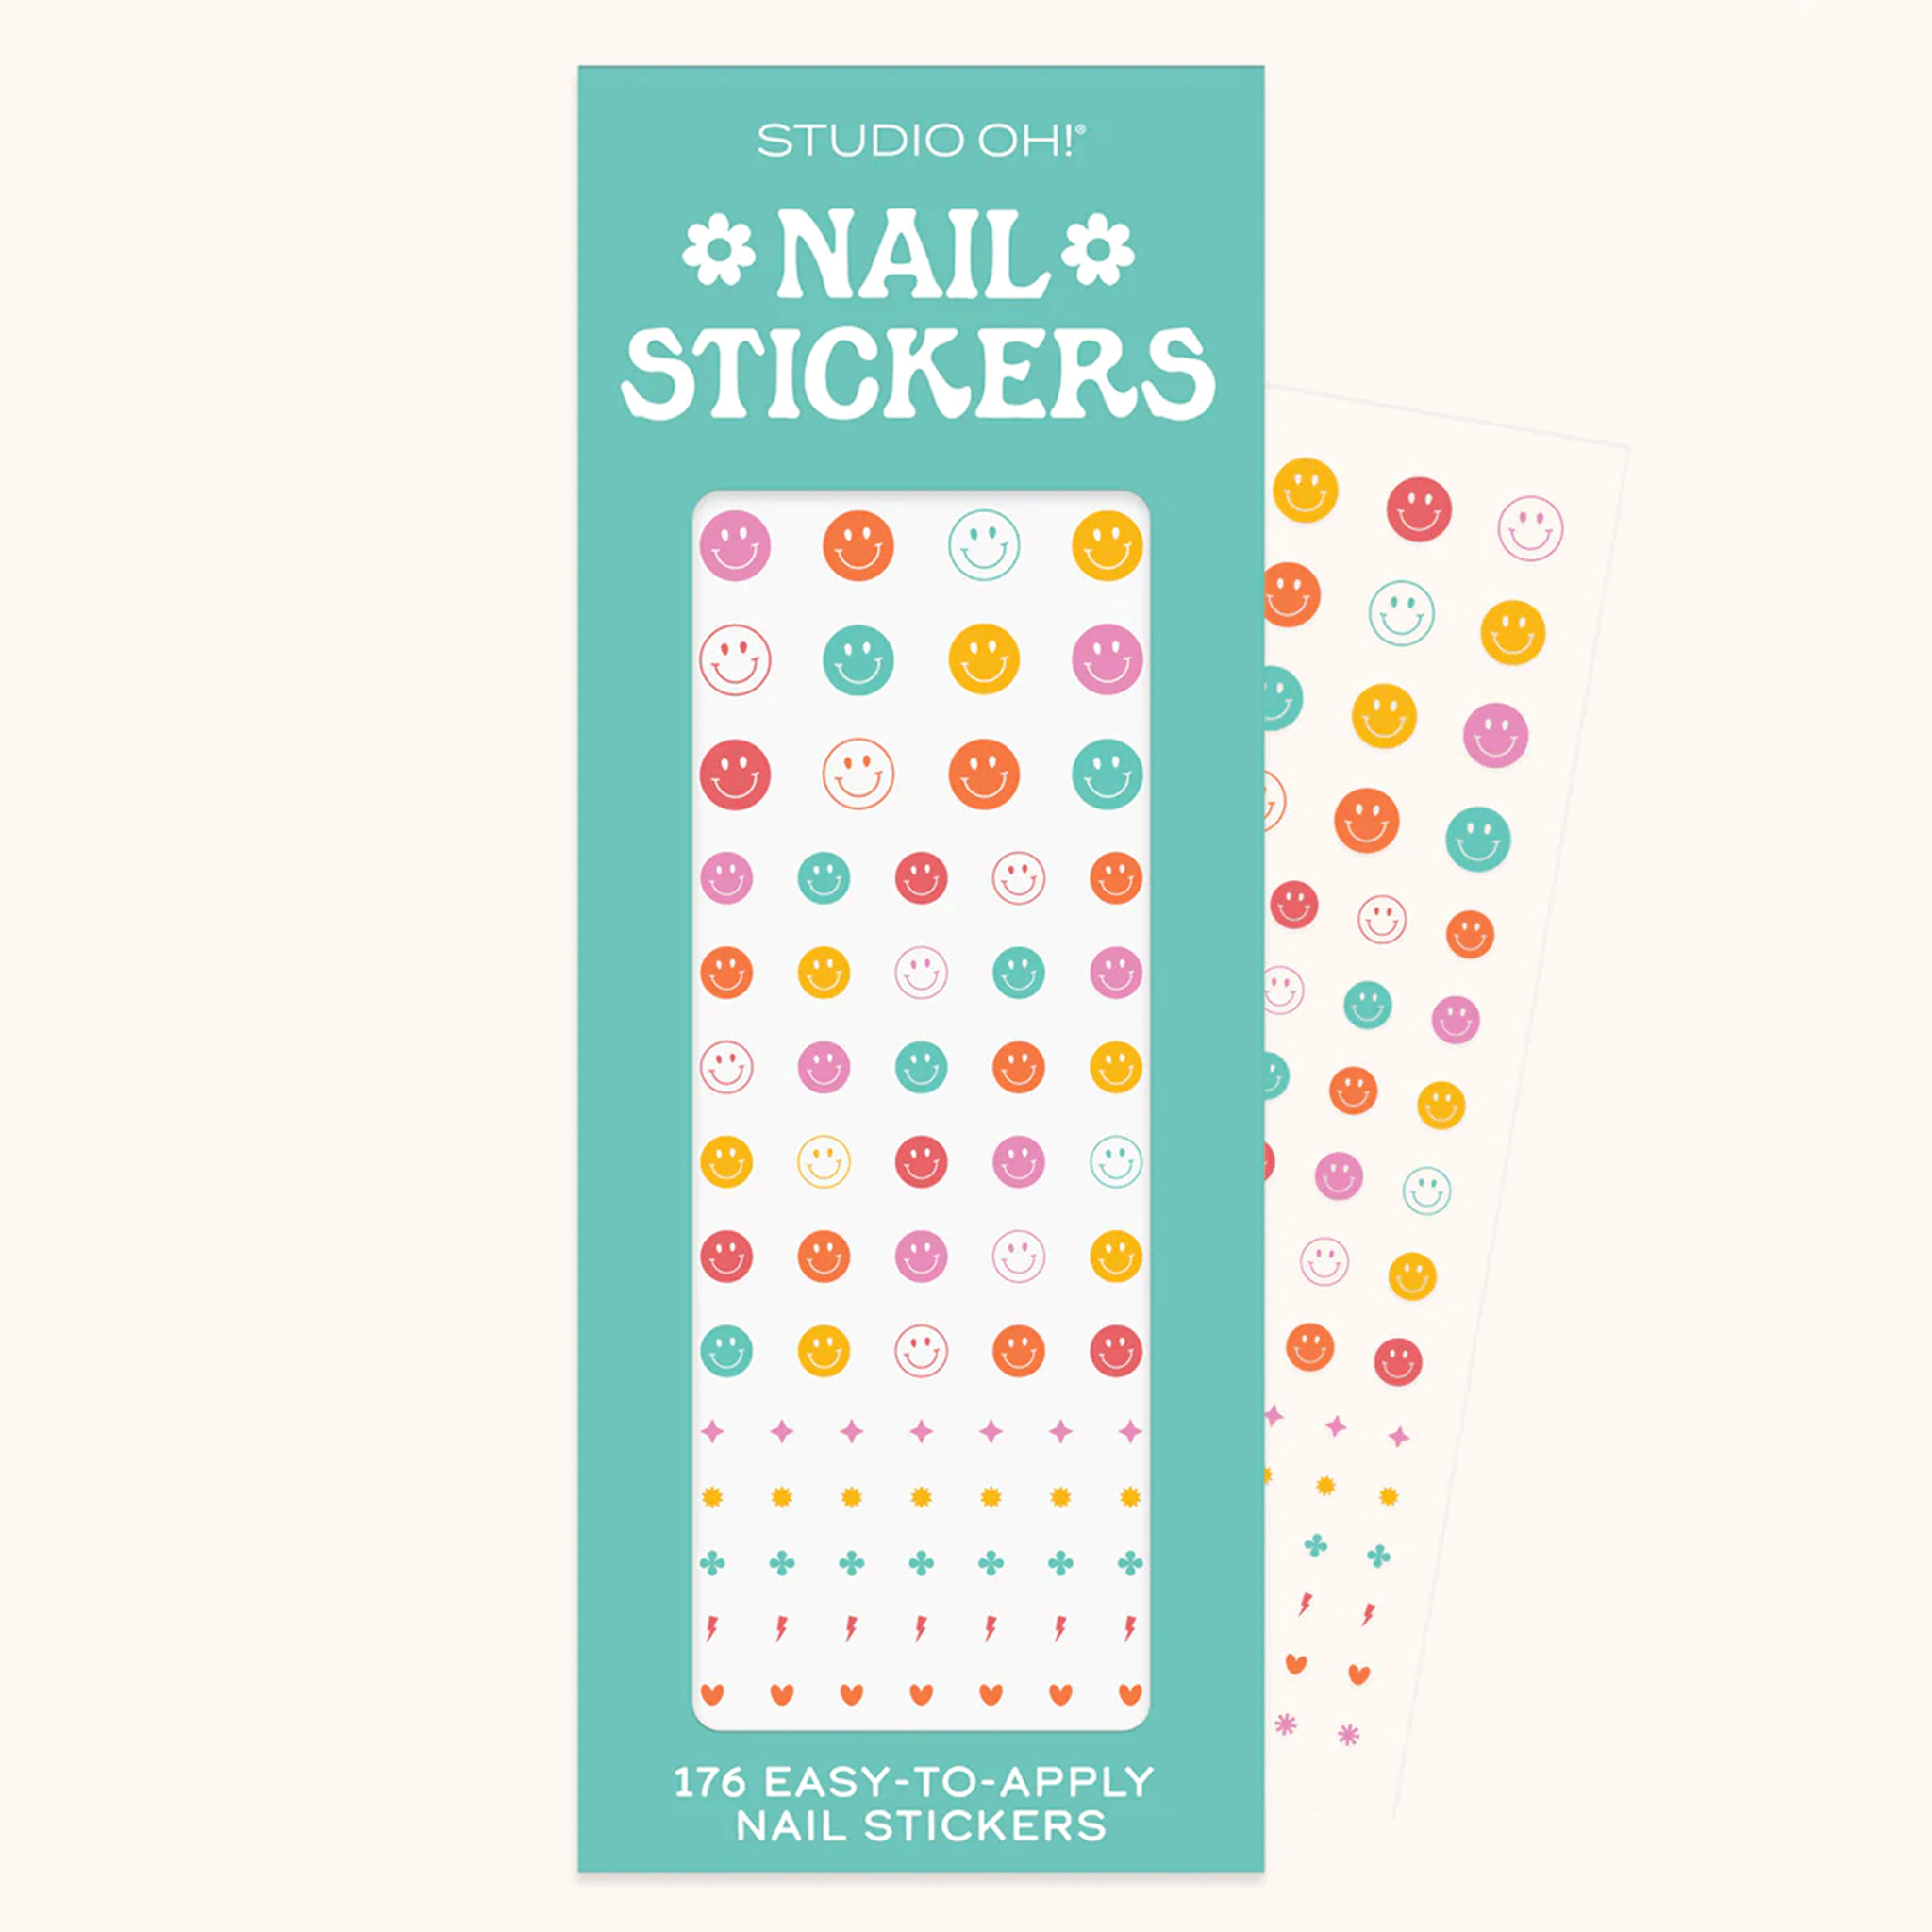 On a white background is a pack of nail stickers in multi-colored smiley faces.  